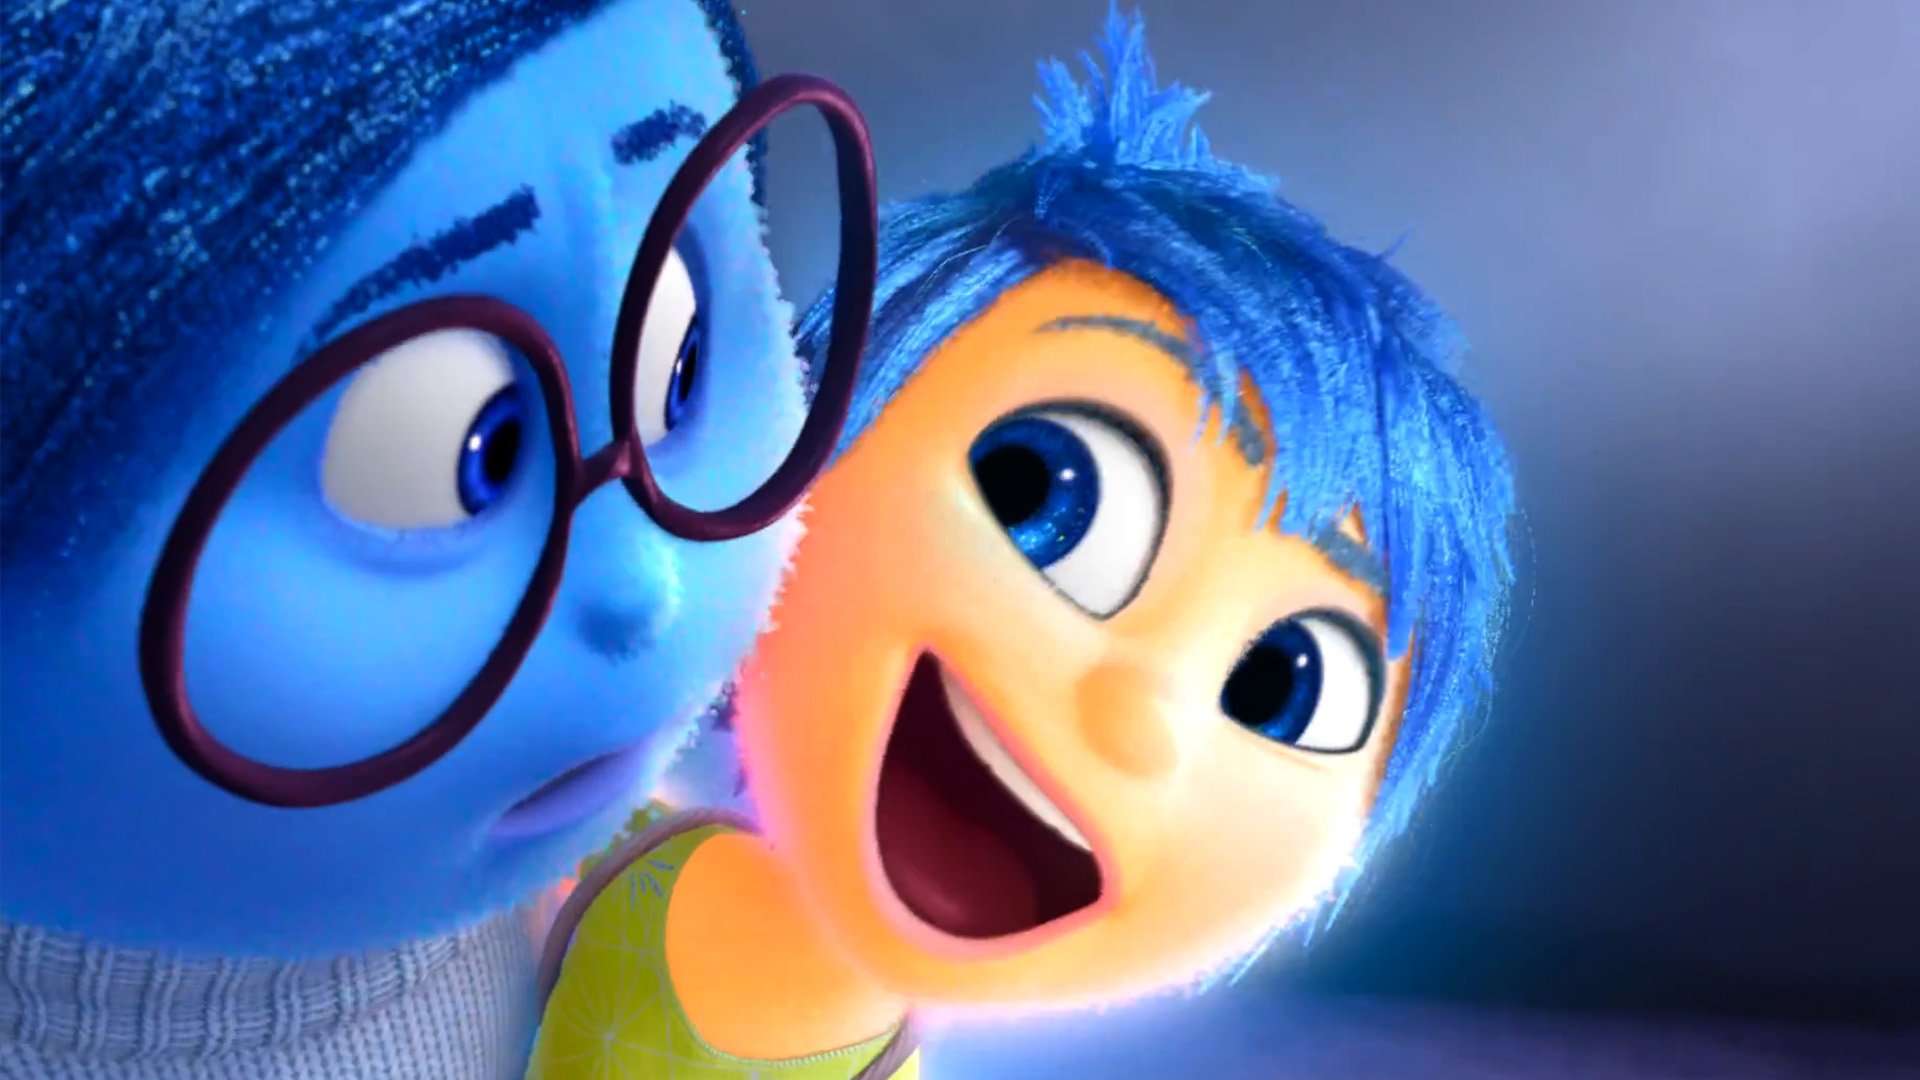 Inside Out Computer Wallpapers Desktop Backgrounds 1920x1080 ID